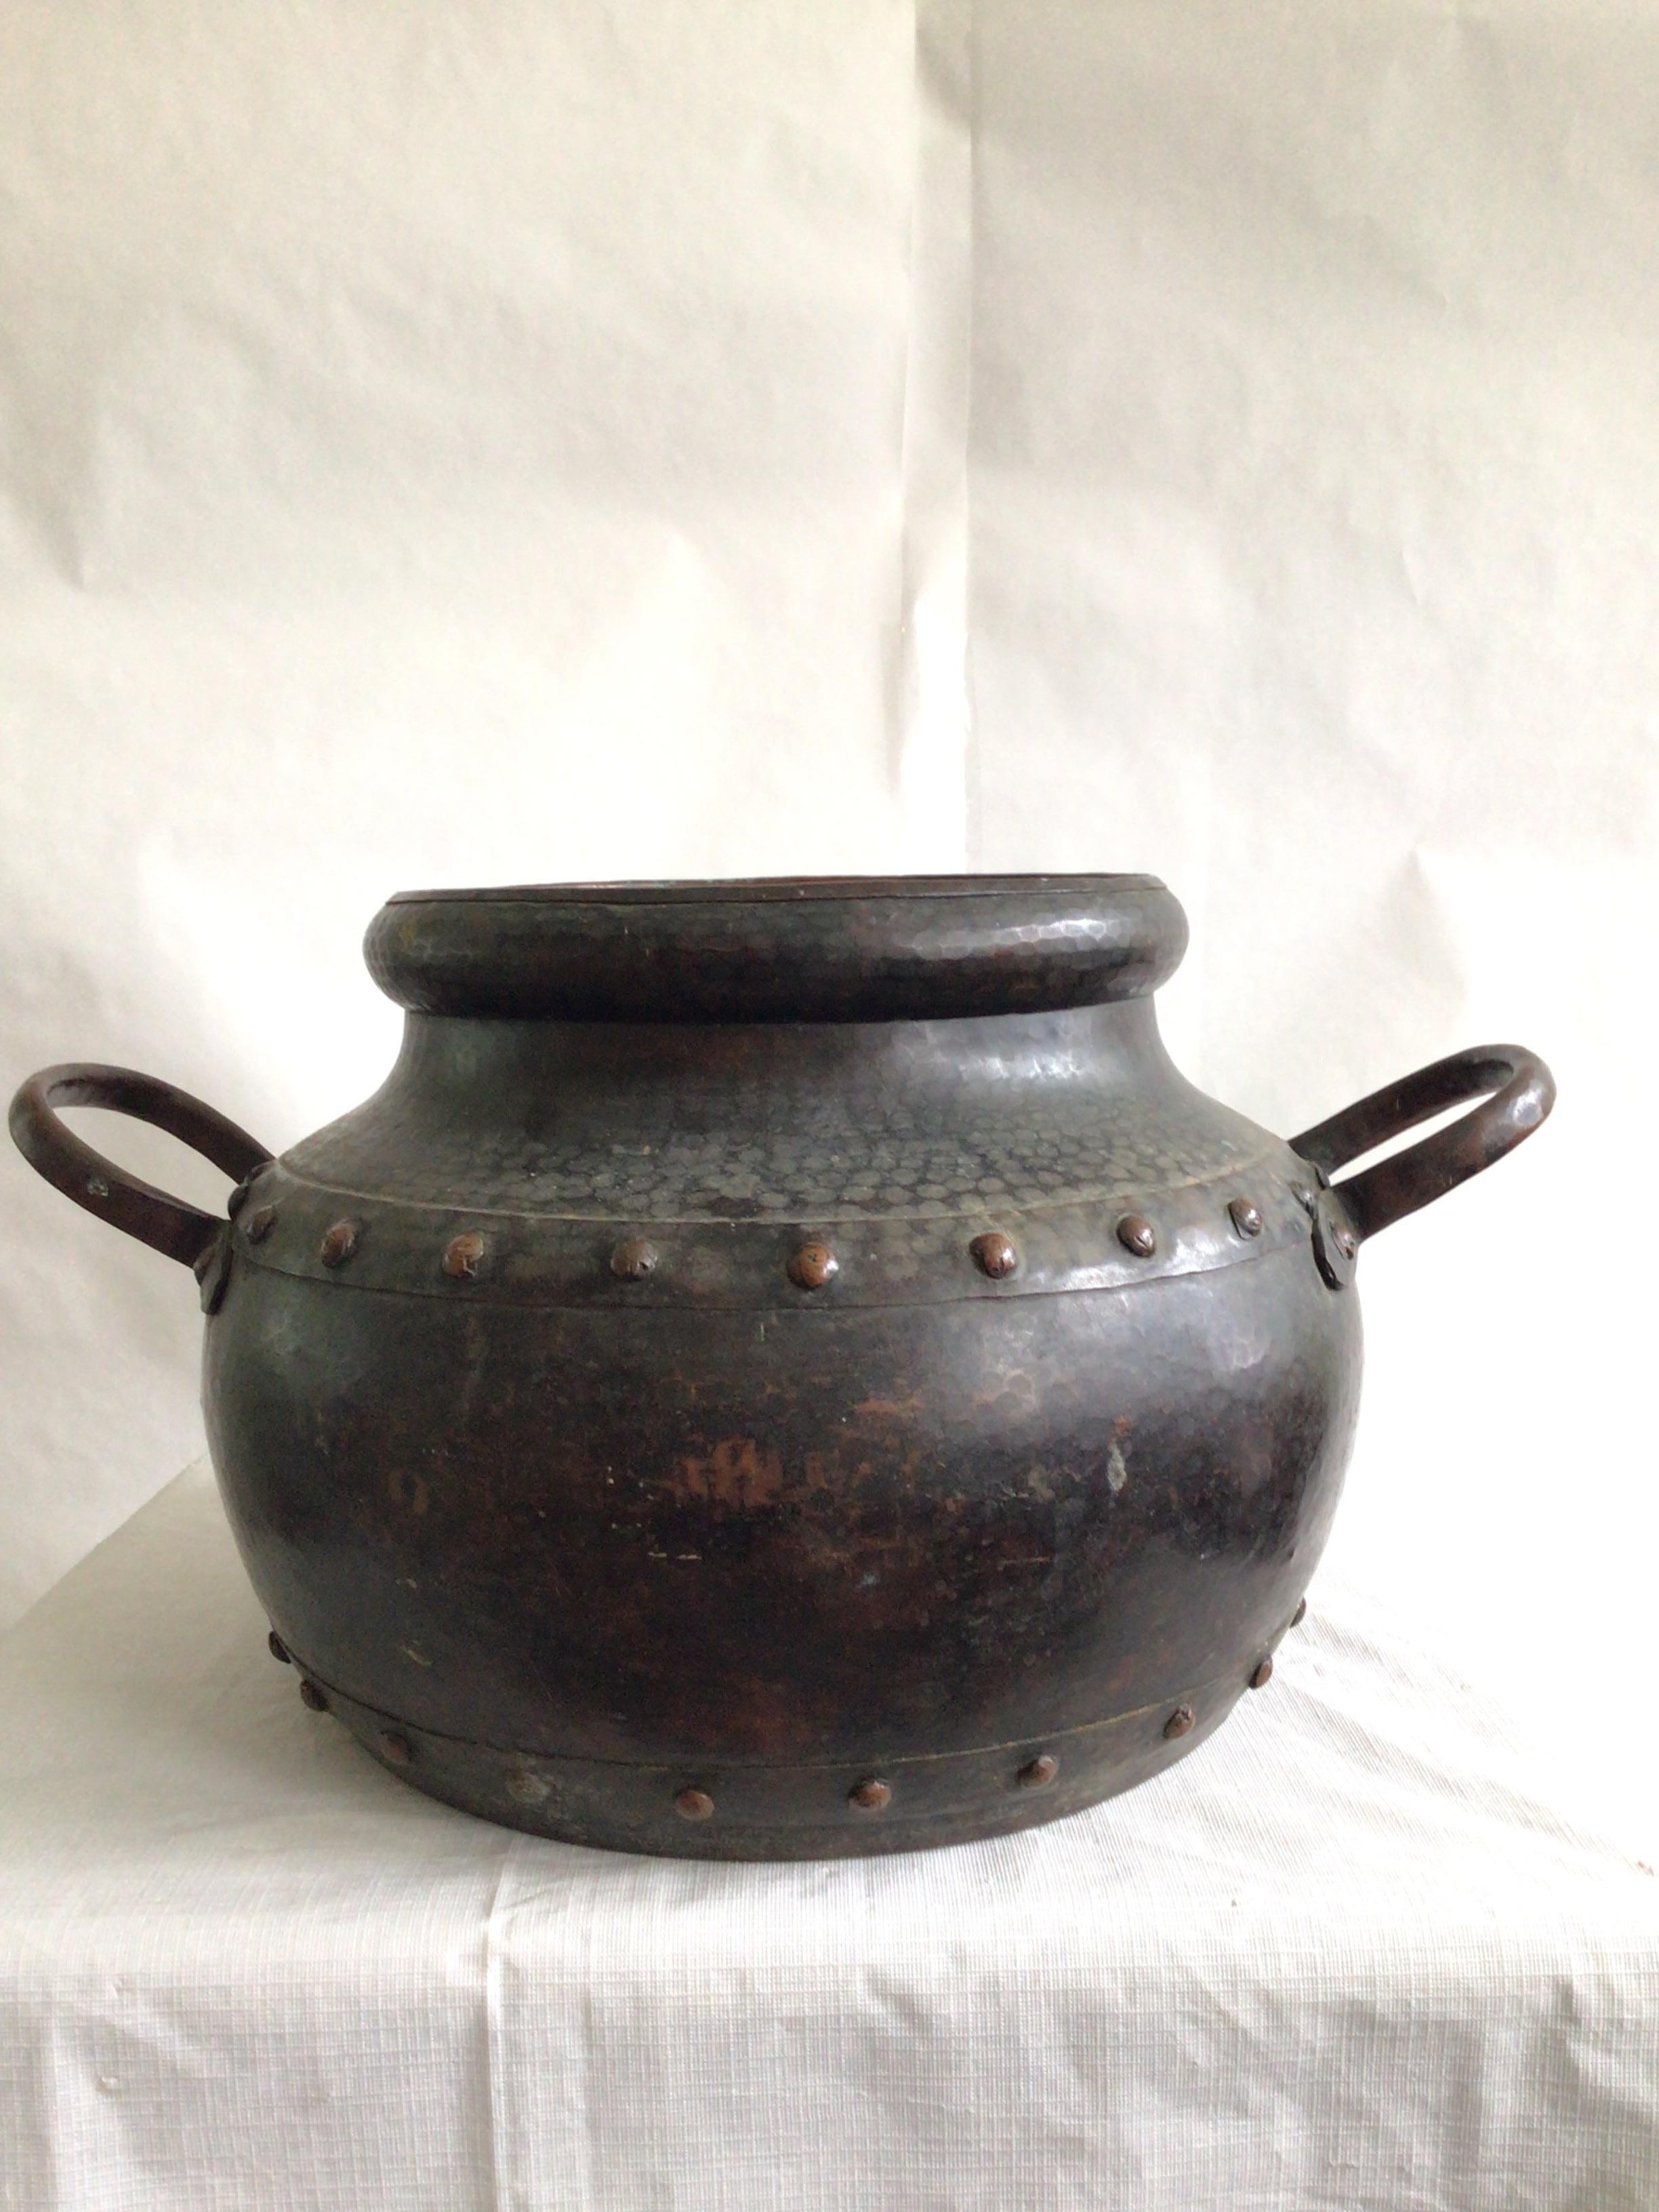 1940s Hand Hammered Studded Copper Pot With Handles
Beautiful patina and hammered finish 
